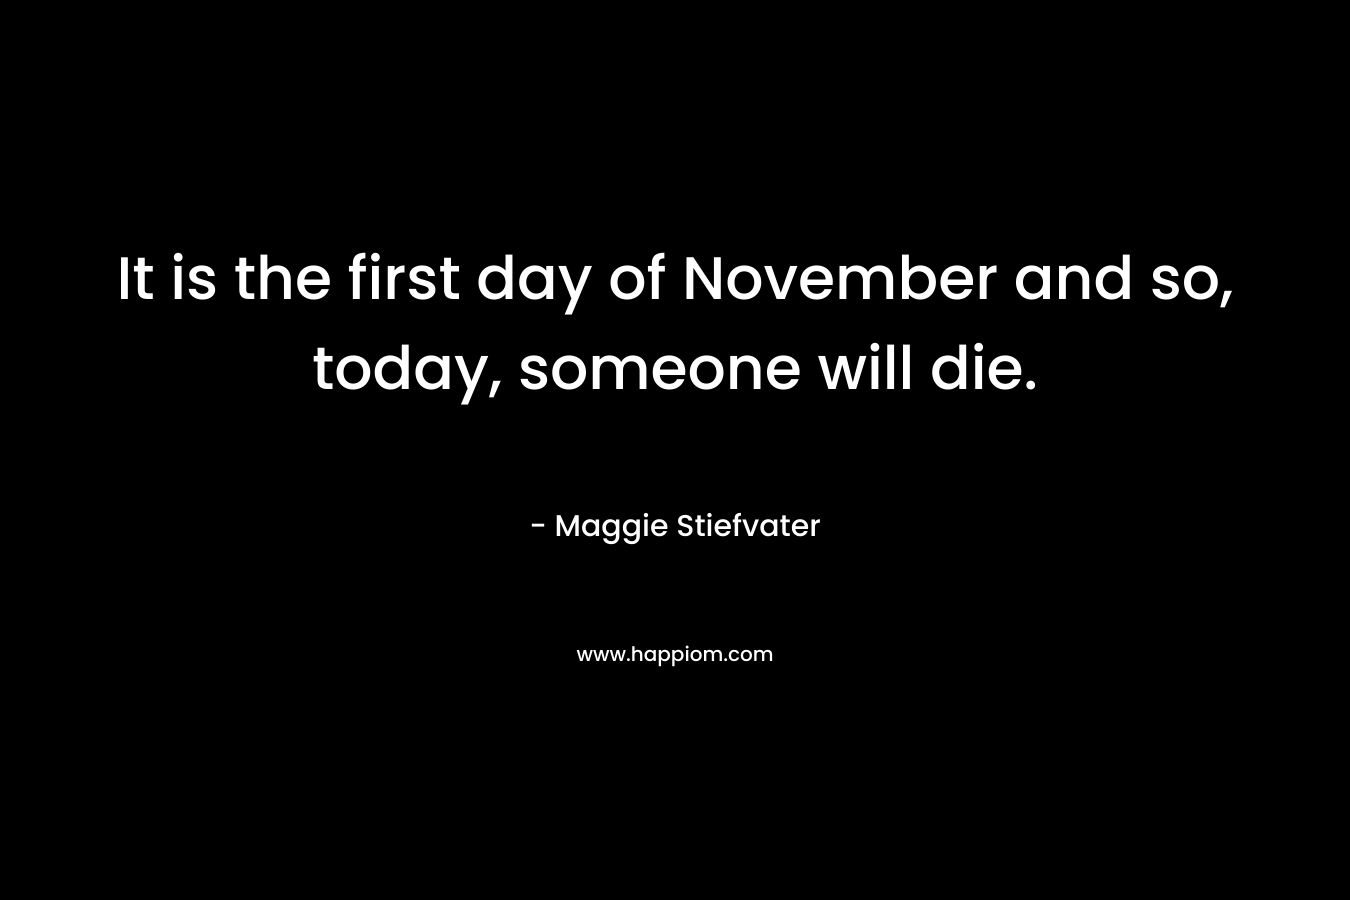 It is the first day of November and so, today, someone will die.